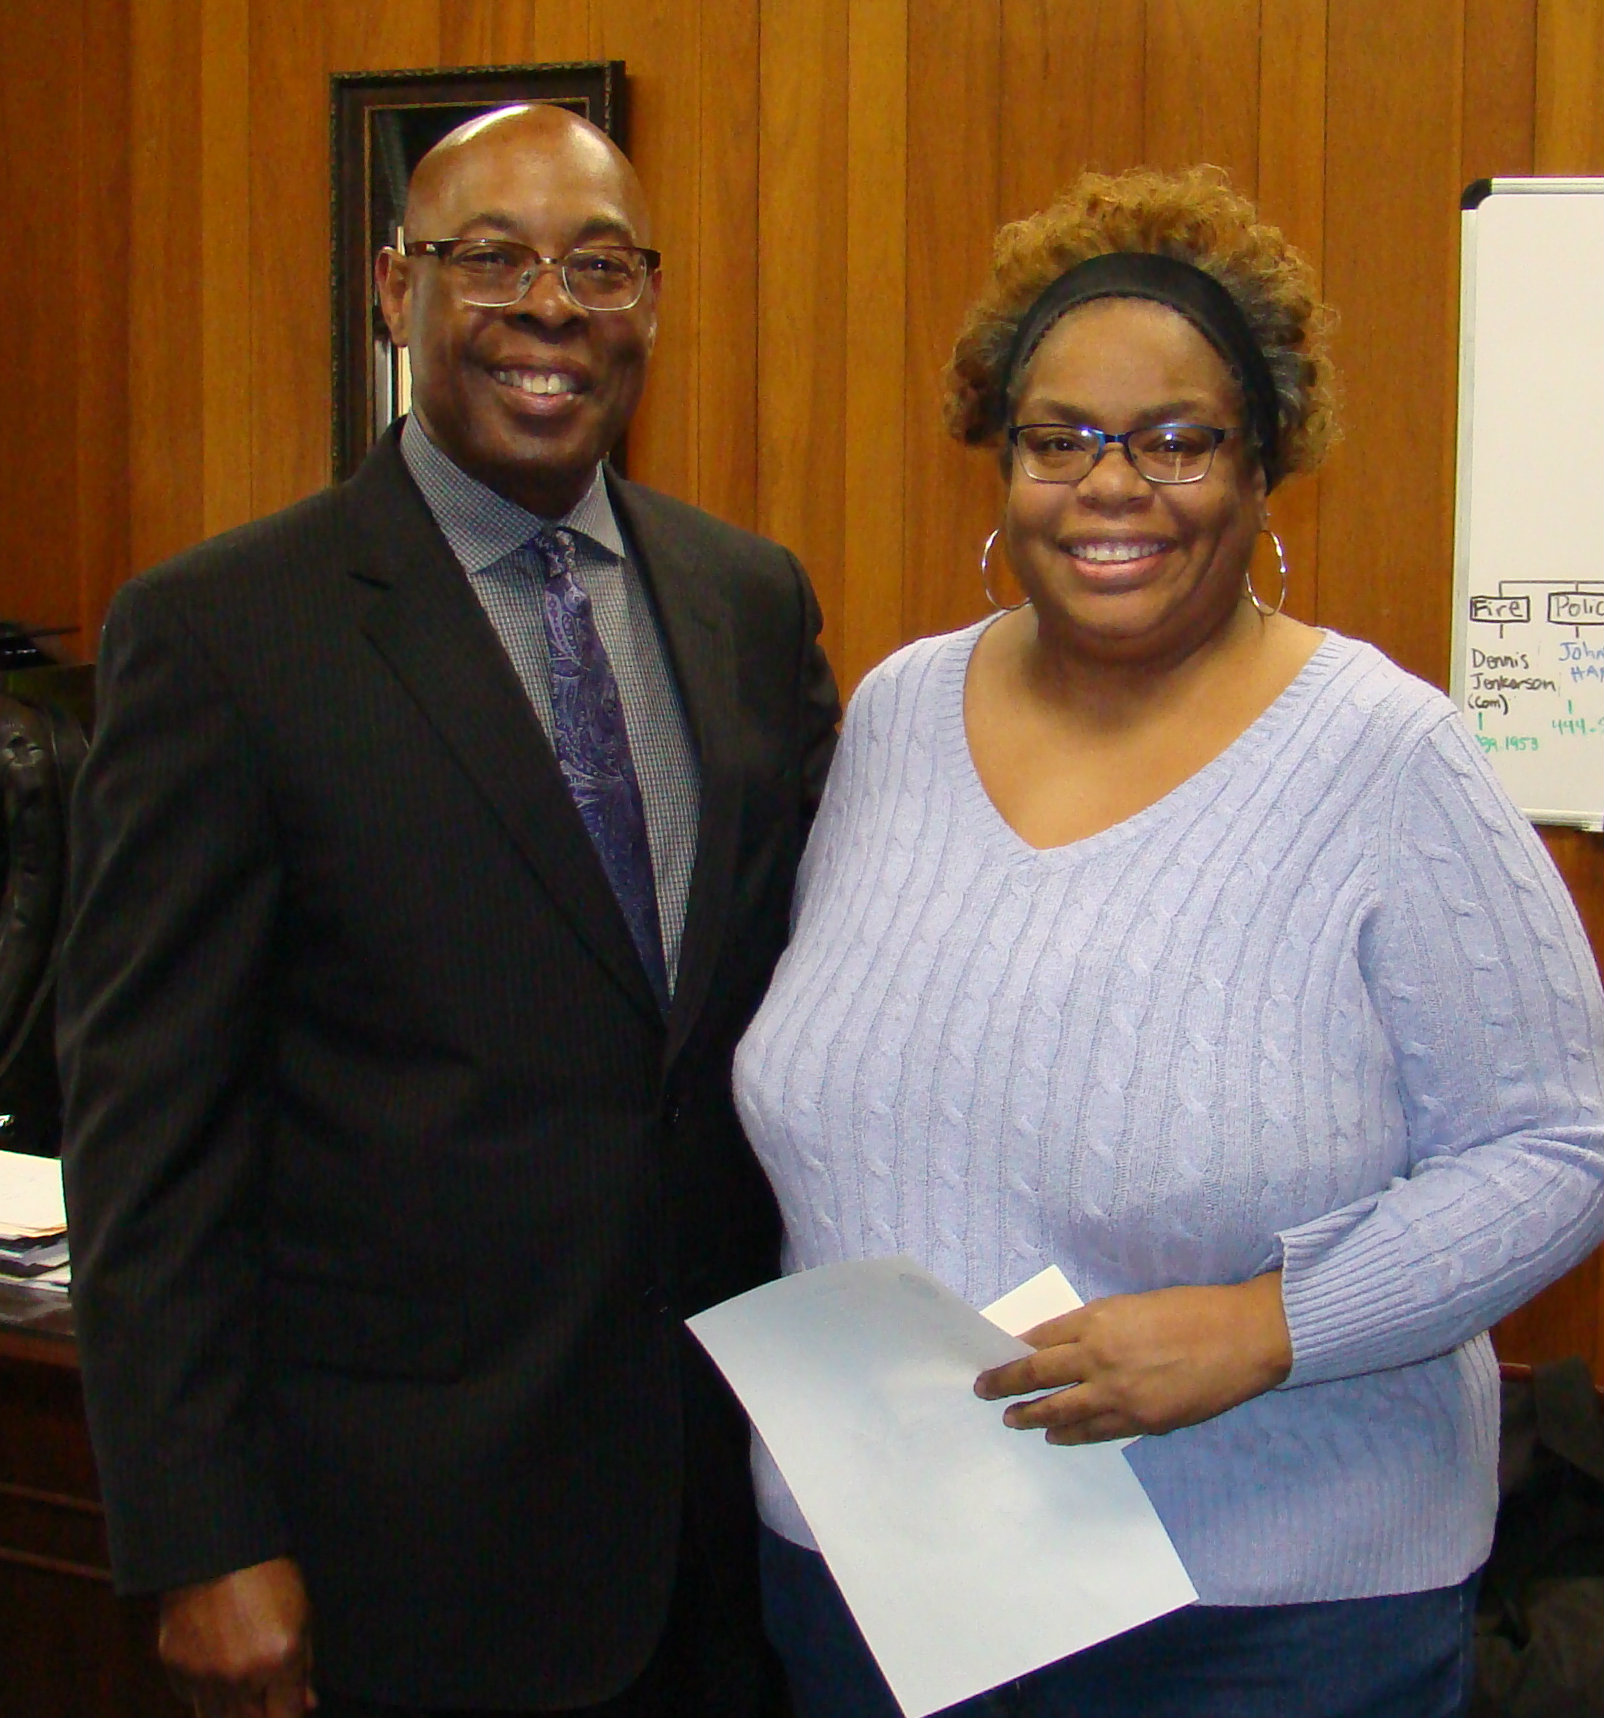 Pictured from left:  Public Safety Director Judge Jimmie Edwards and Maria Hicks